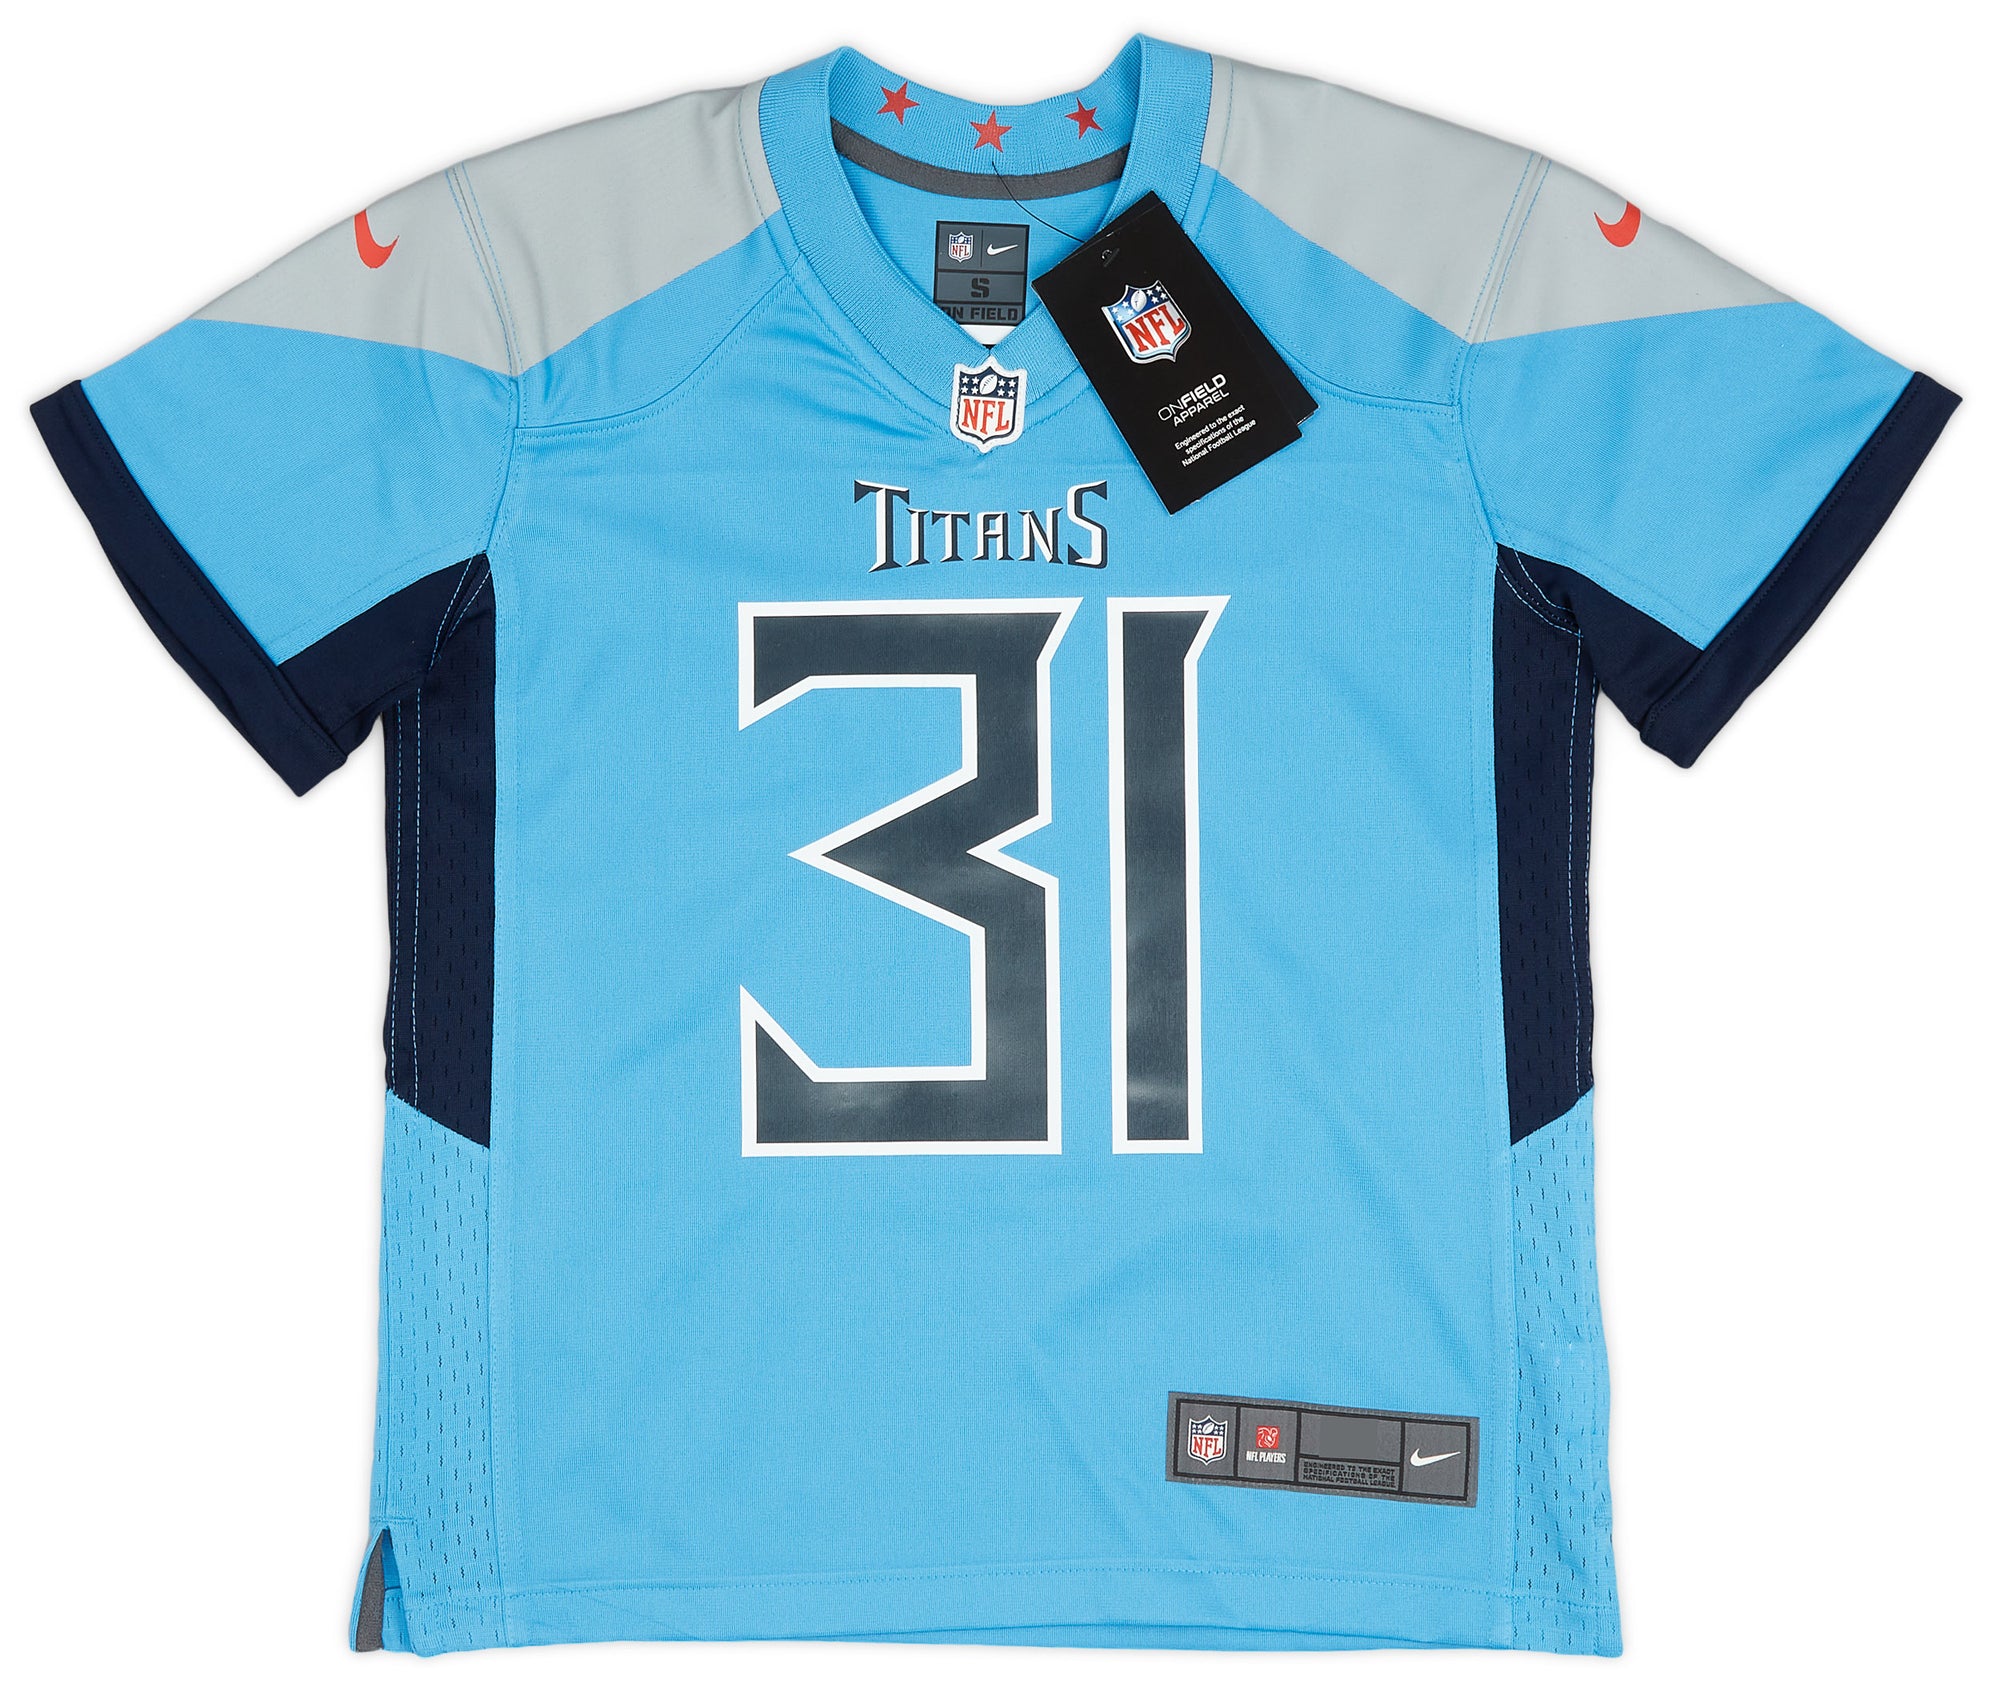 2018-23 TENNESSEE TITANS BYARD #31 NIKE GAME JERSEY (ALTERNATE) Y